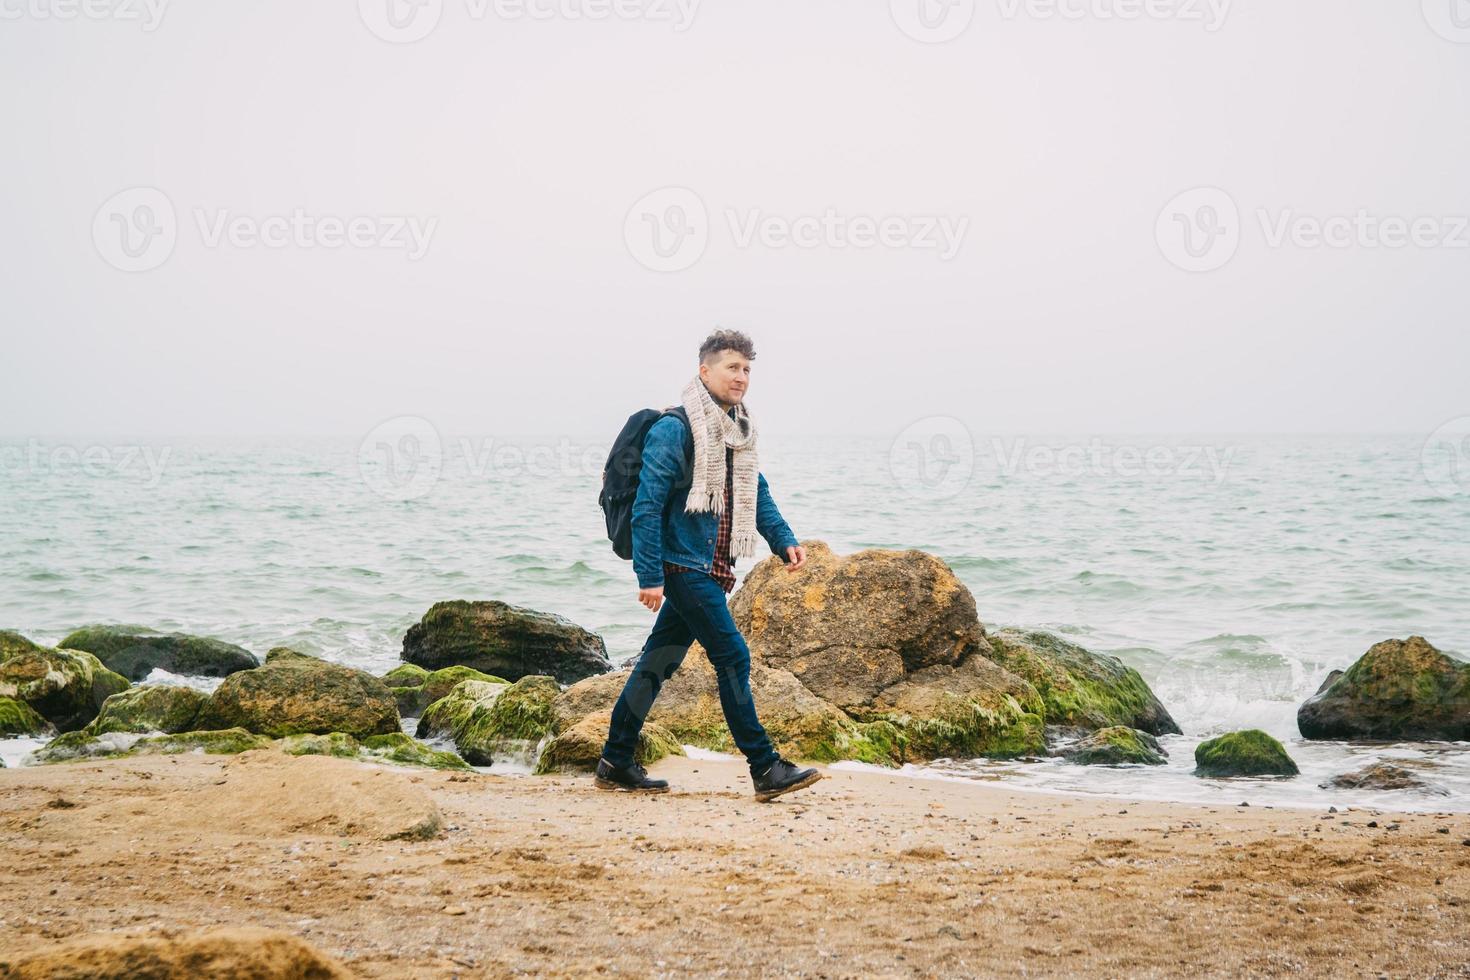 Traveler man with backpack standing on sandy beach in middle of rocks against sea background photo